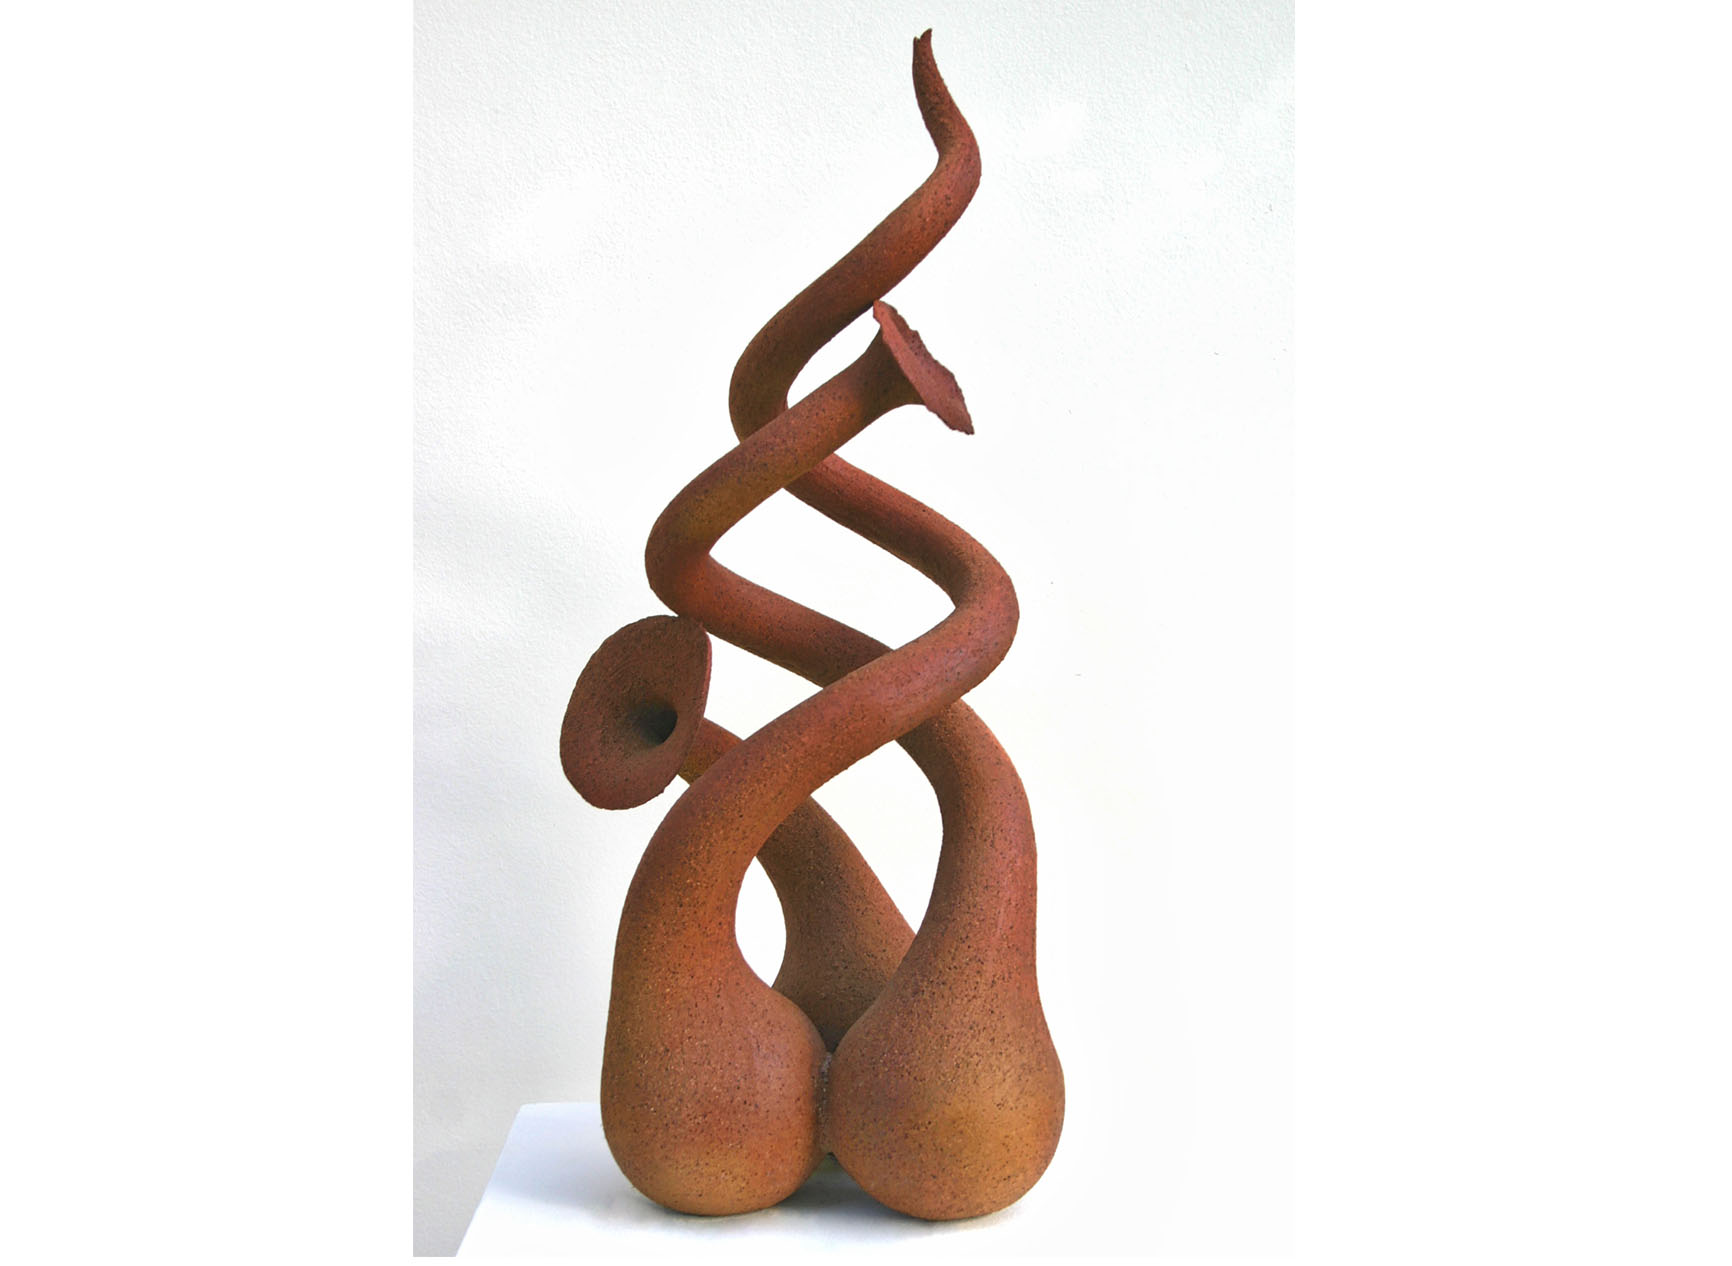 Large twisting earthy ceramic sculpture called Whimisical Notion